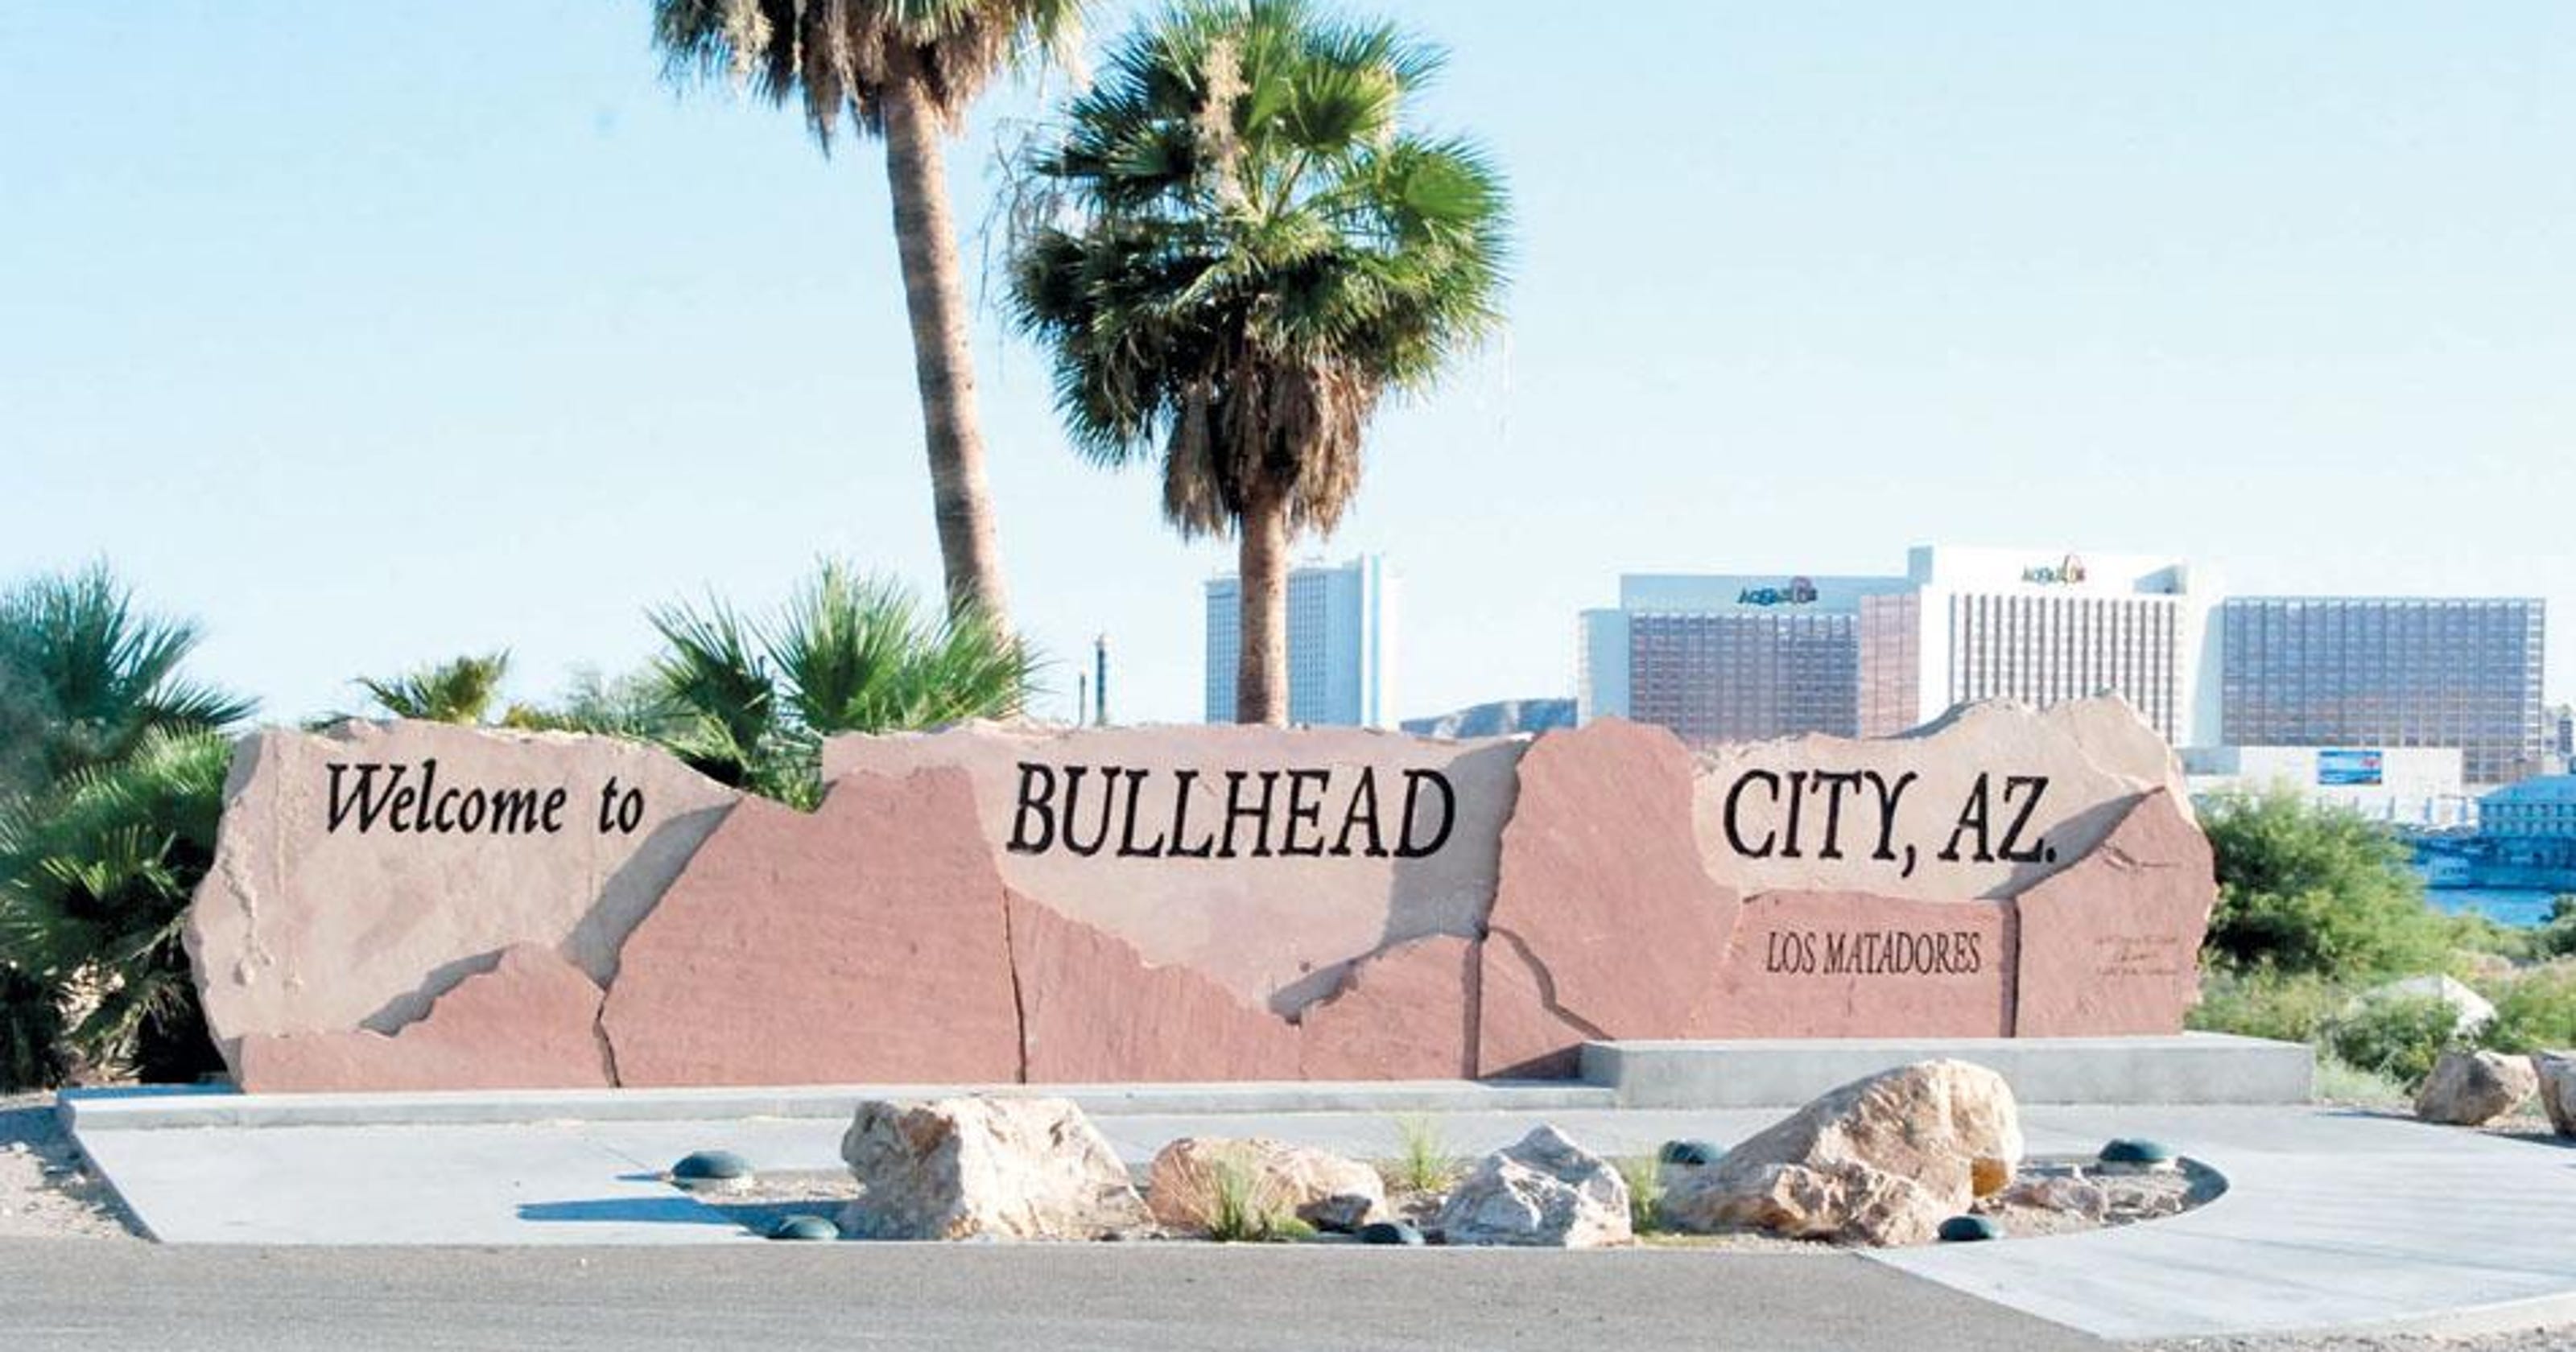 Which Arizona cities will cost you the least?